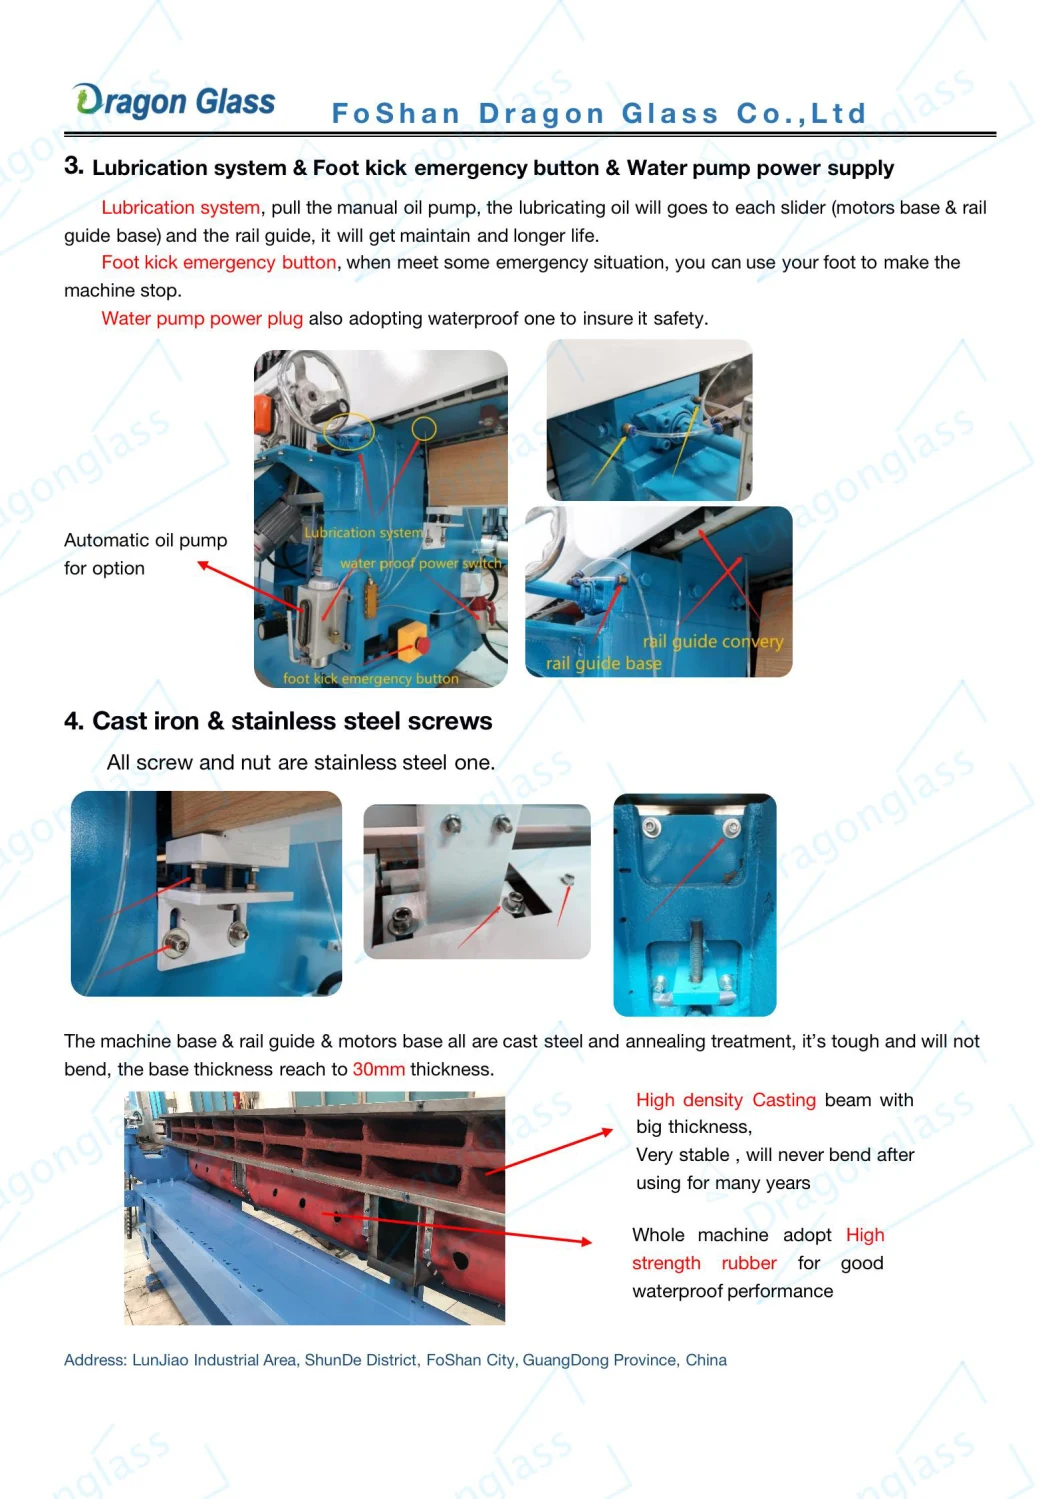 Automatically Control 9 Motors Mirror Glass Beveling Machine for Decoration Glass Processing Machine